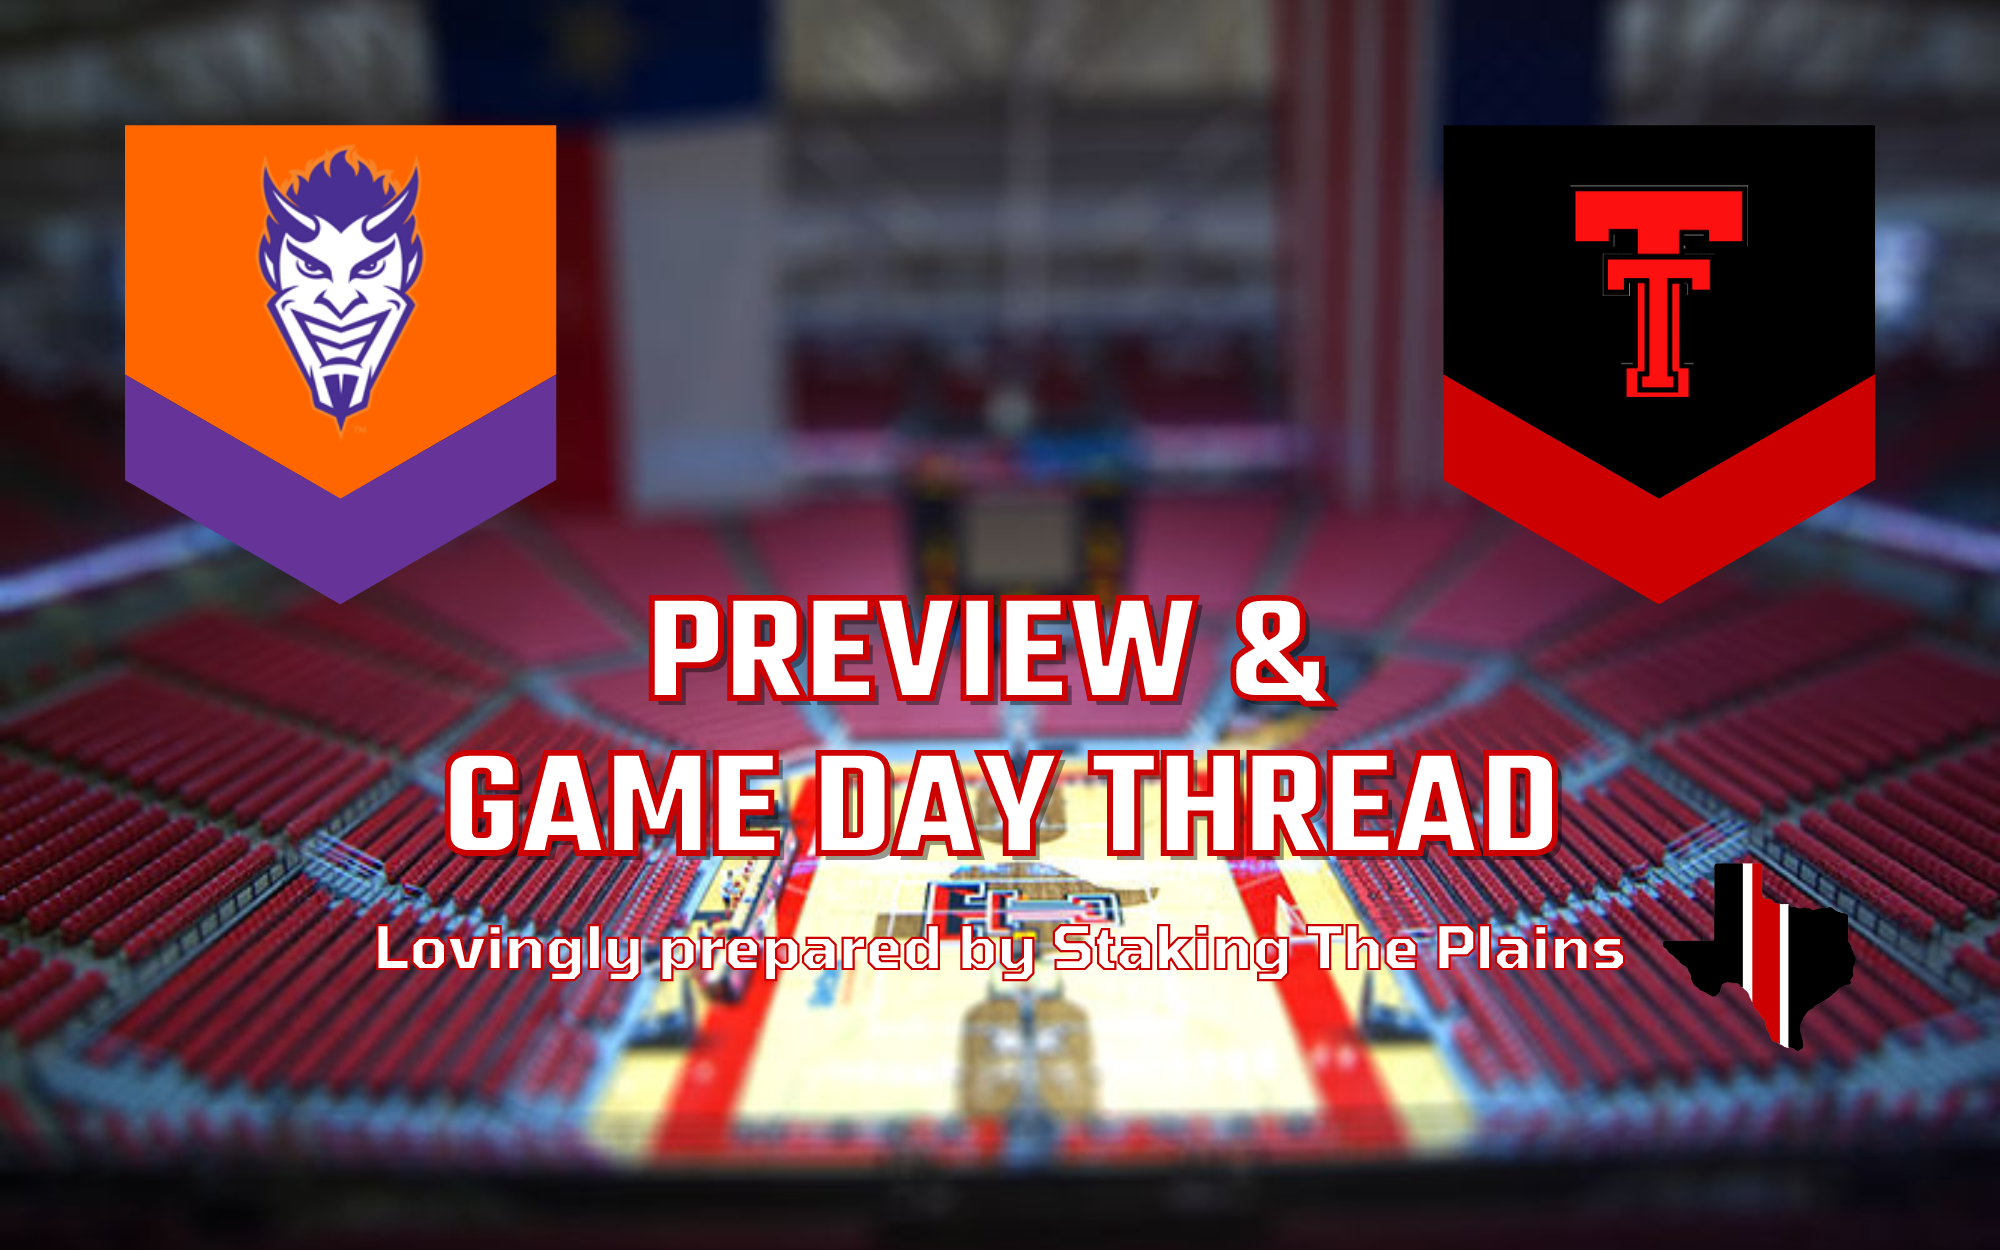 Preview & Game Day Thread: Northwestern State vs. Texas Tech